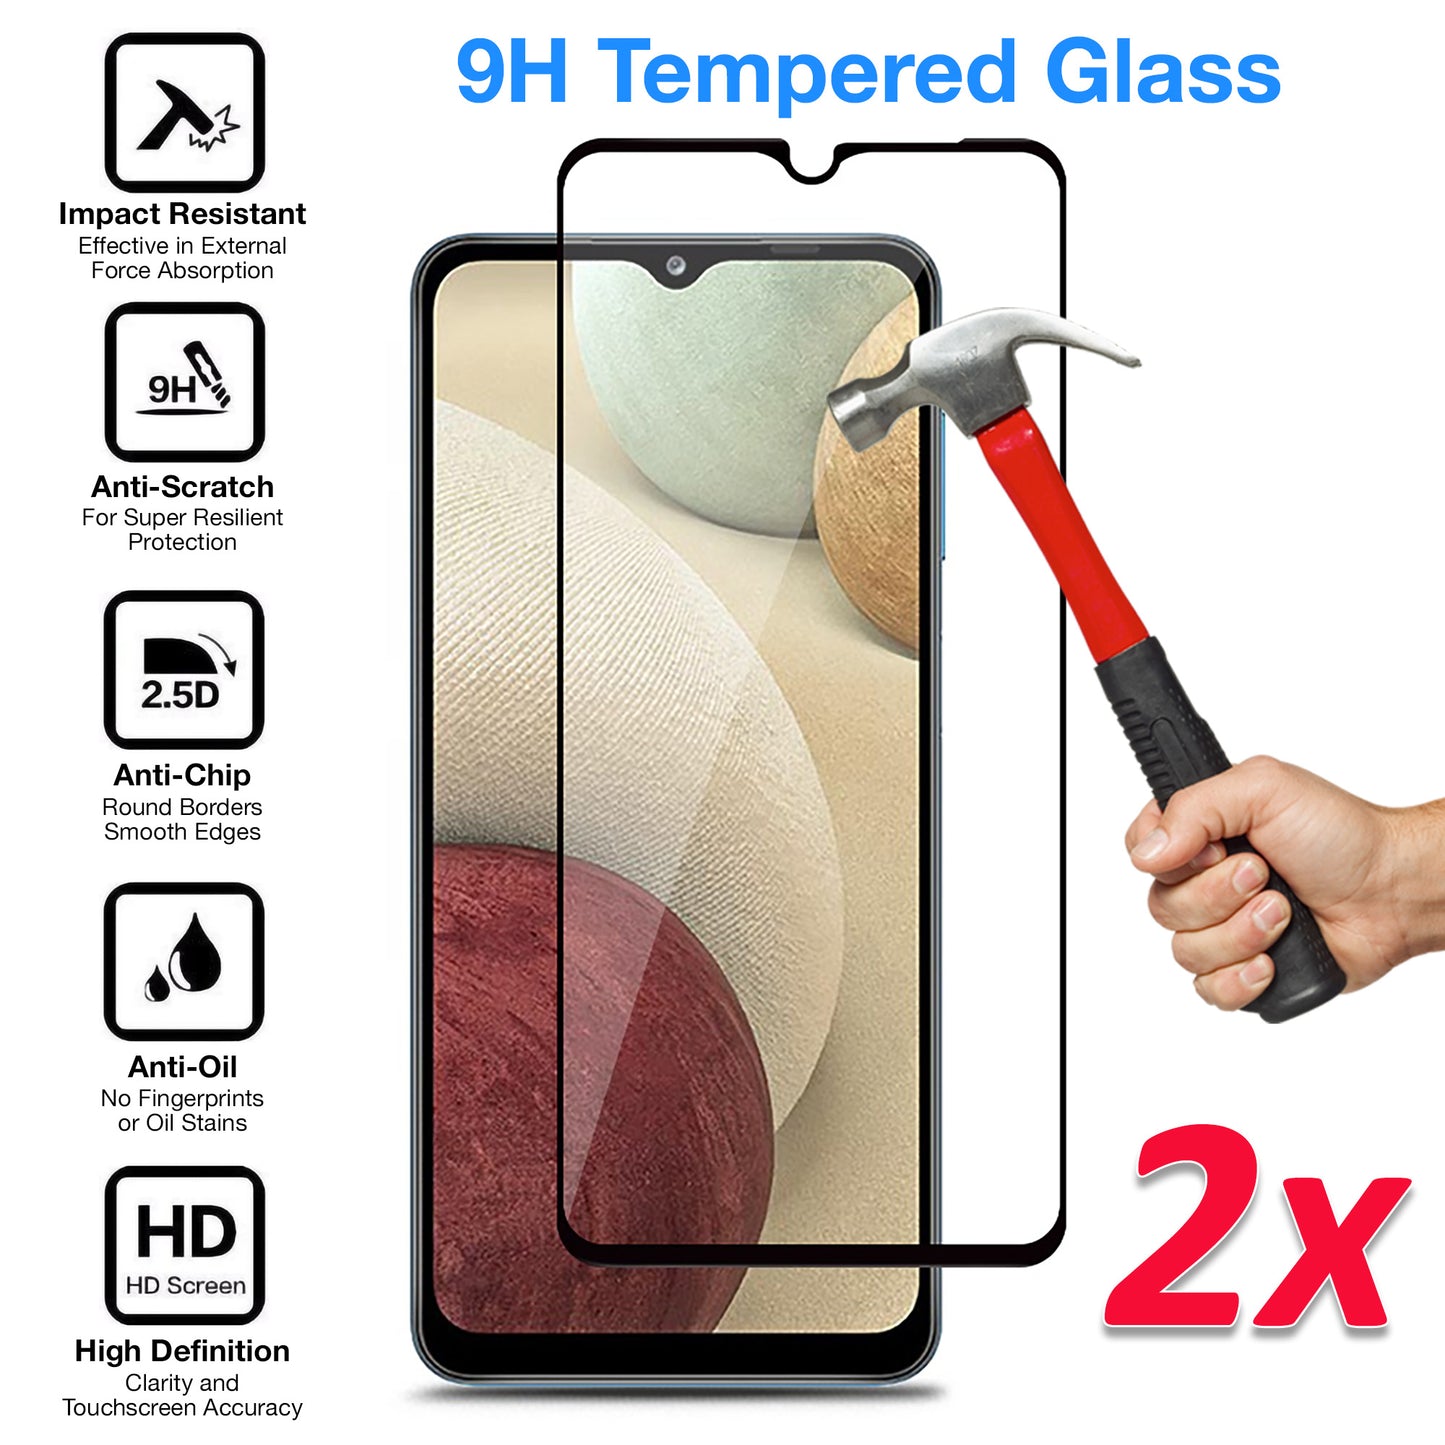 [2 Pack] MEZON Full Coverage Samsung Galaxy A12 Tempered Glass Crystal Clear Premium 9H HD Screen Protector (A12, 9H Full)